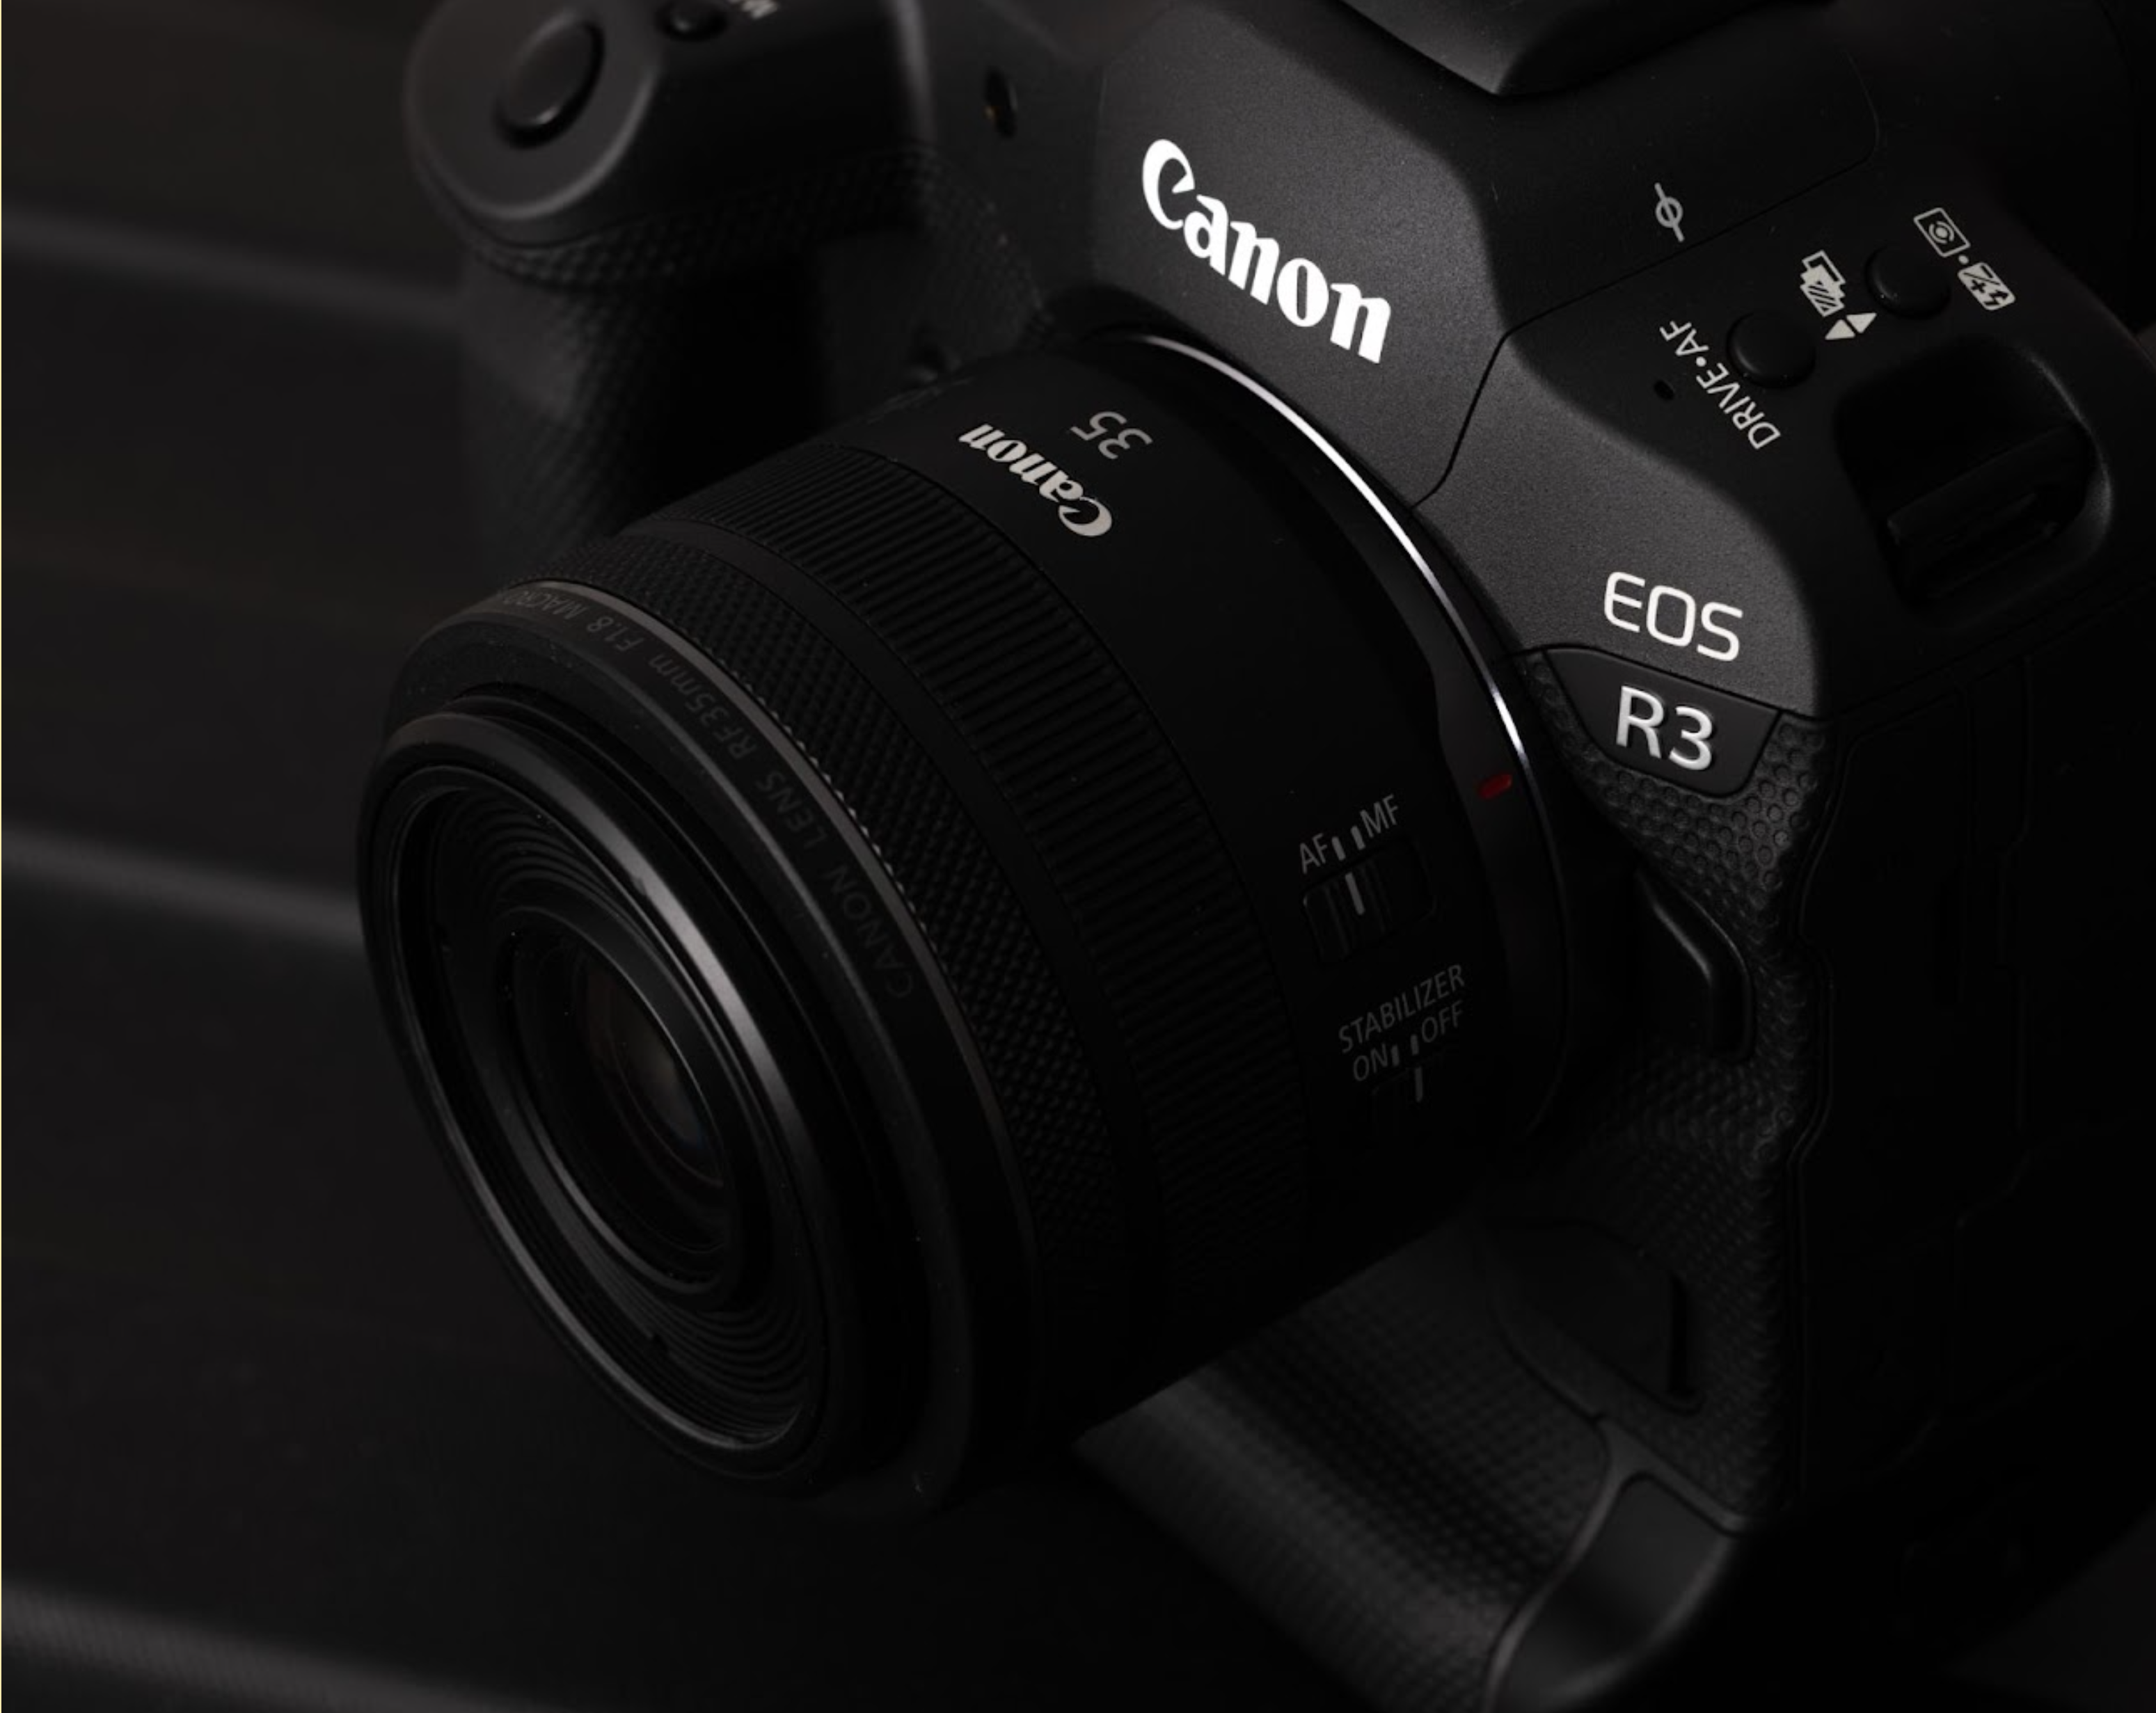 Canon launches its lightest full frame EOS R System camera - Canon